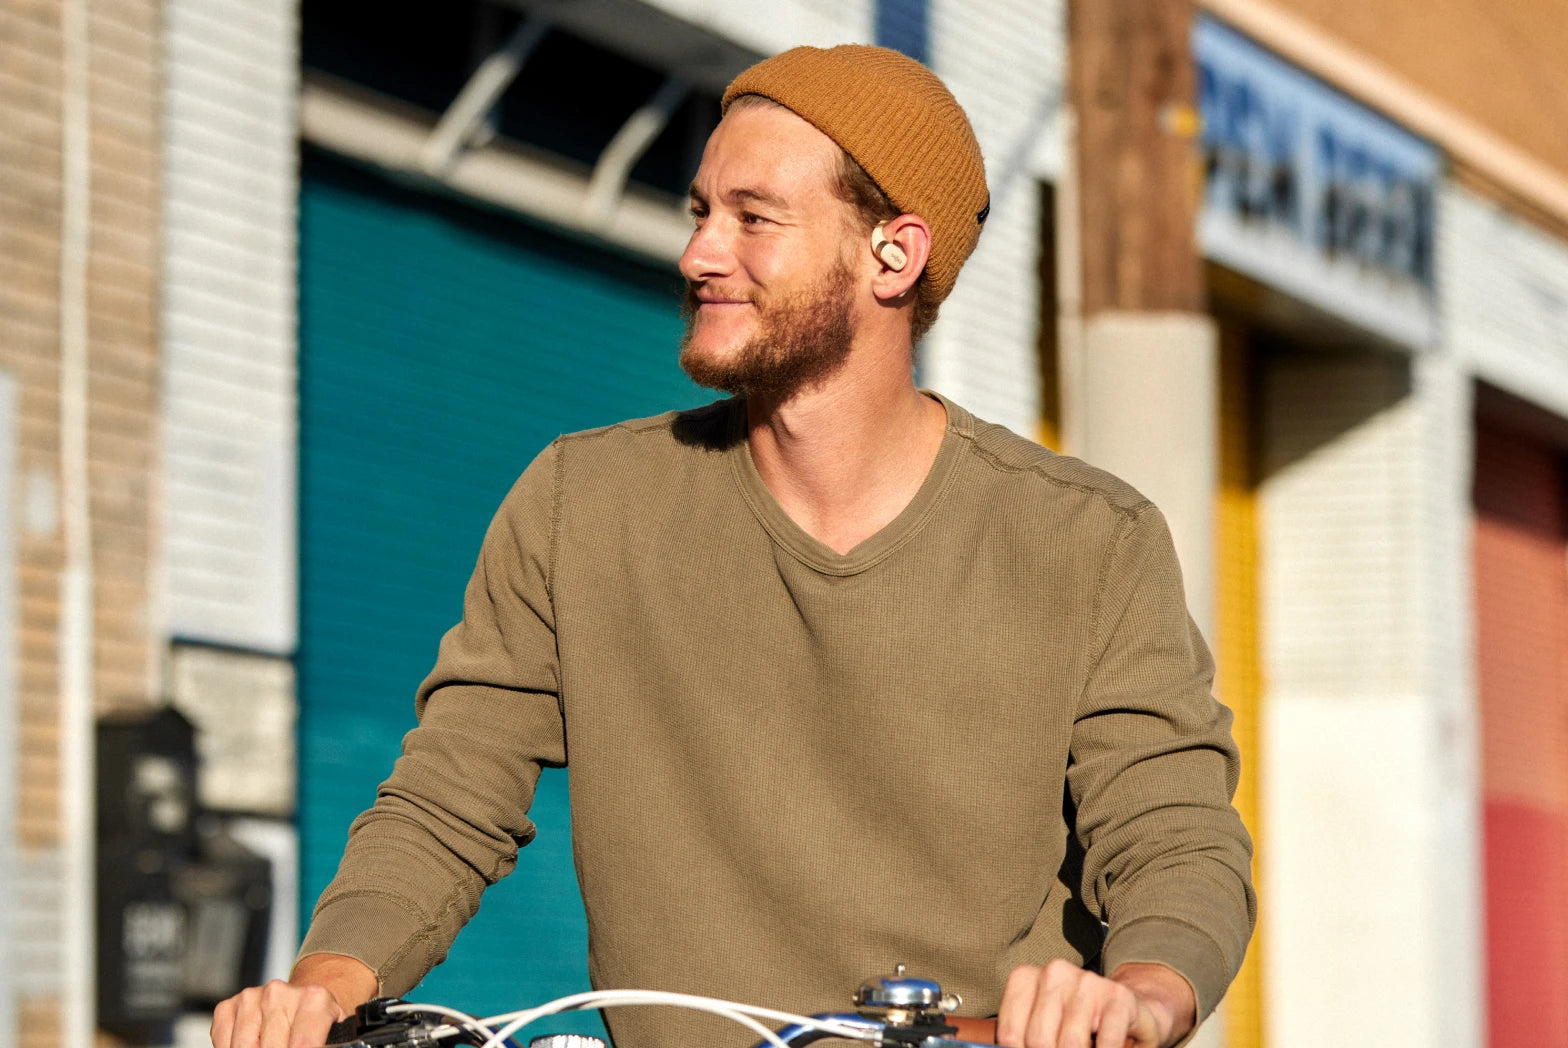 openfit open ear earbuds lightwight and stylish